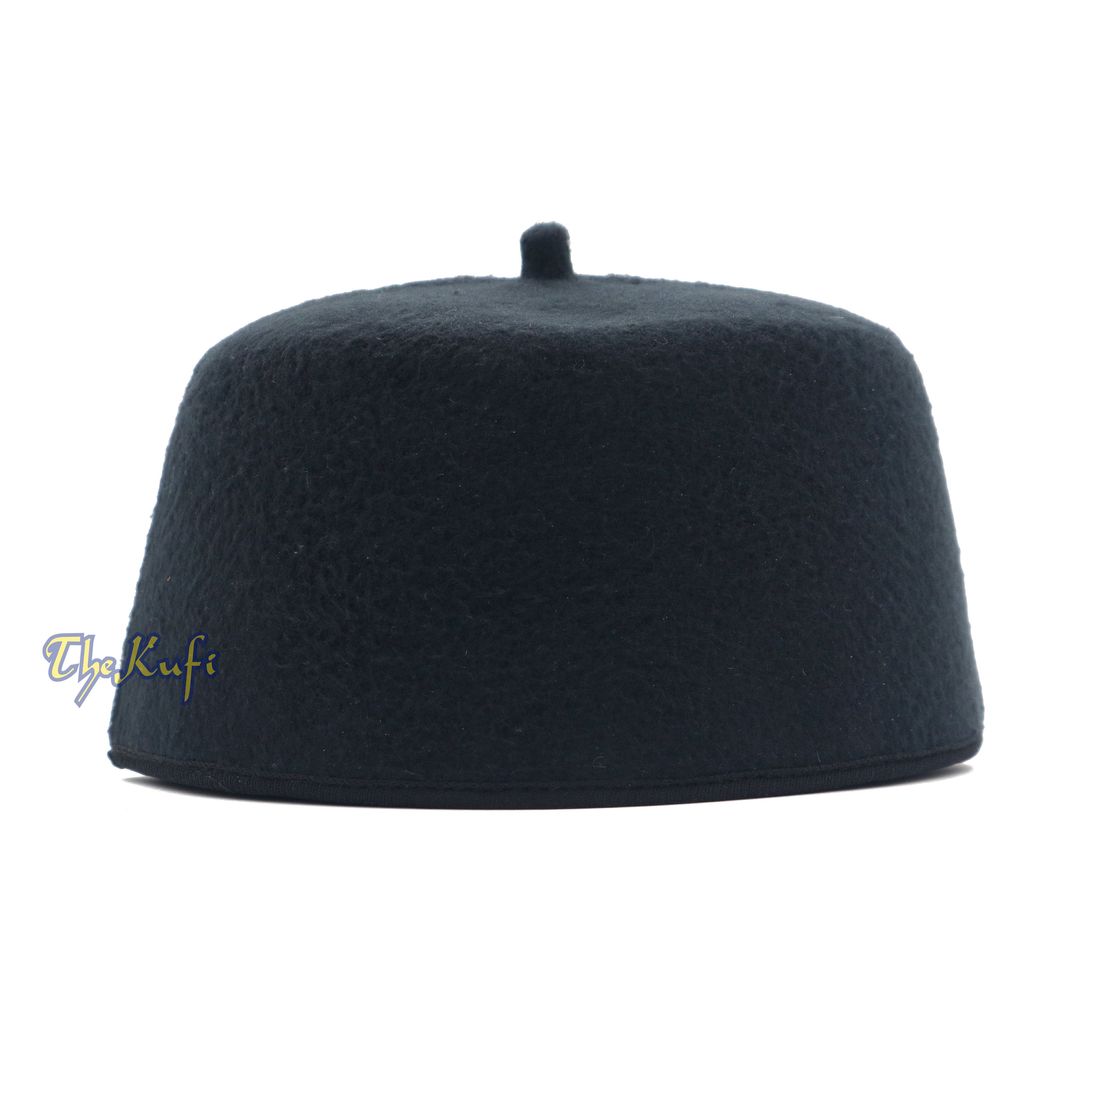 Handmade Black Fez-style Kufi Crown with Tip